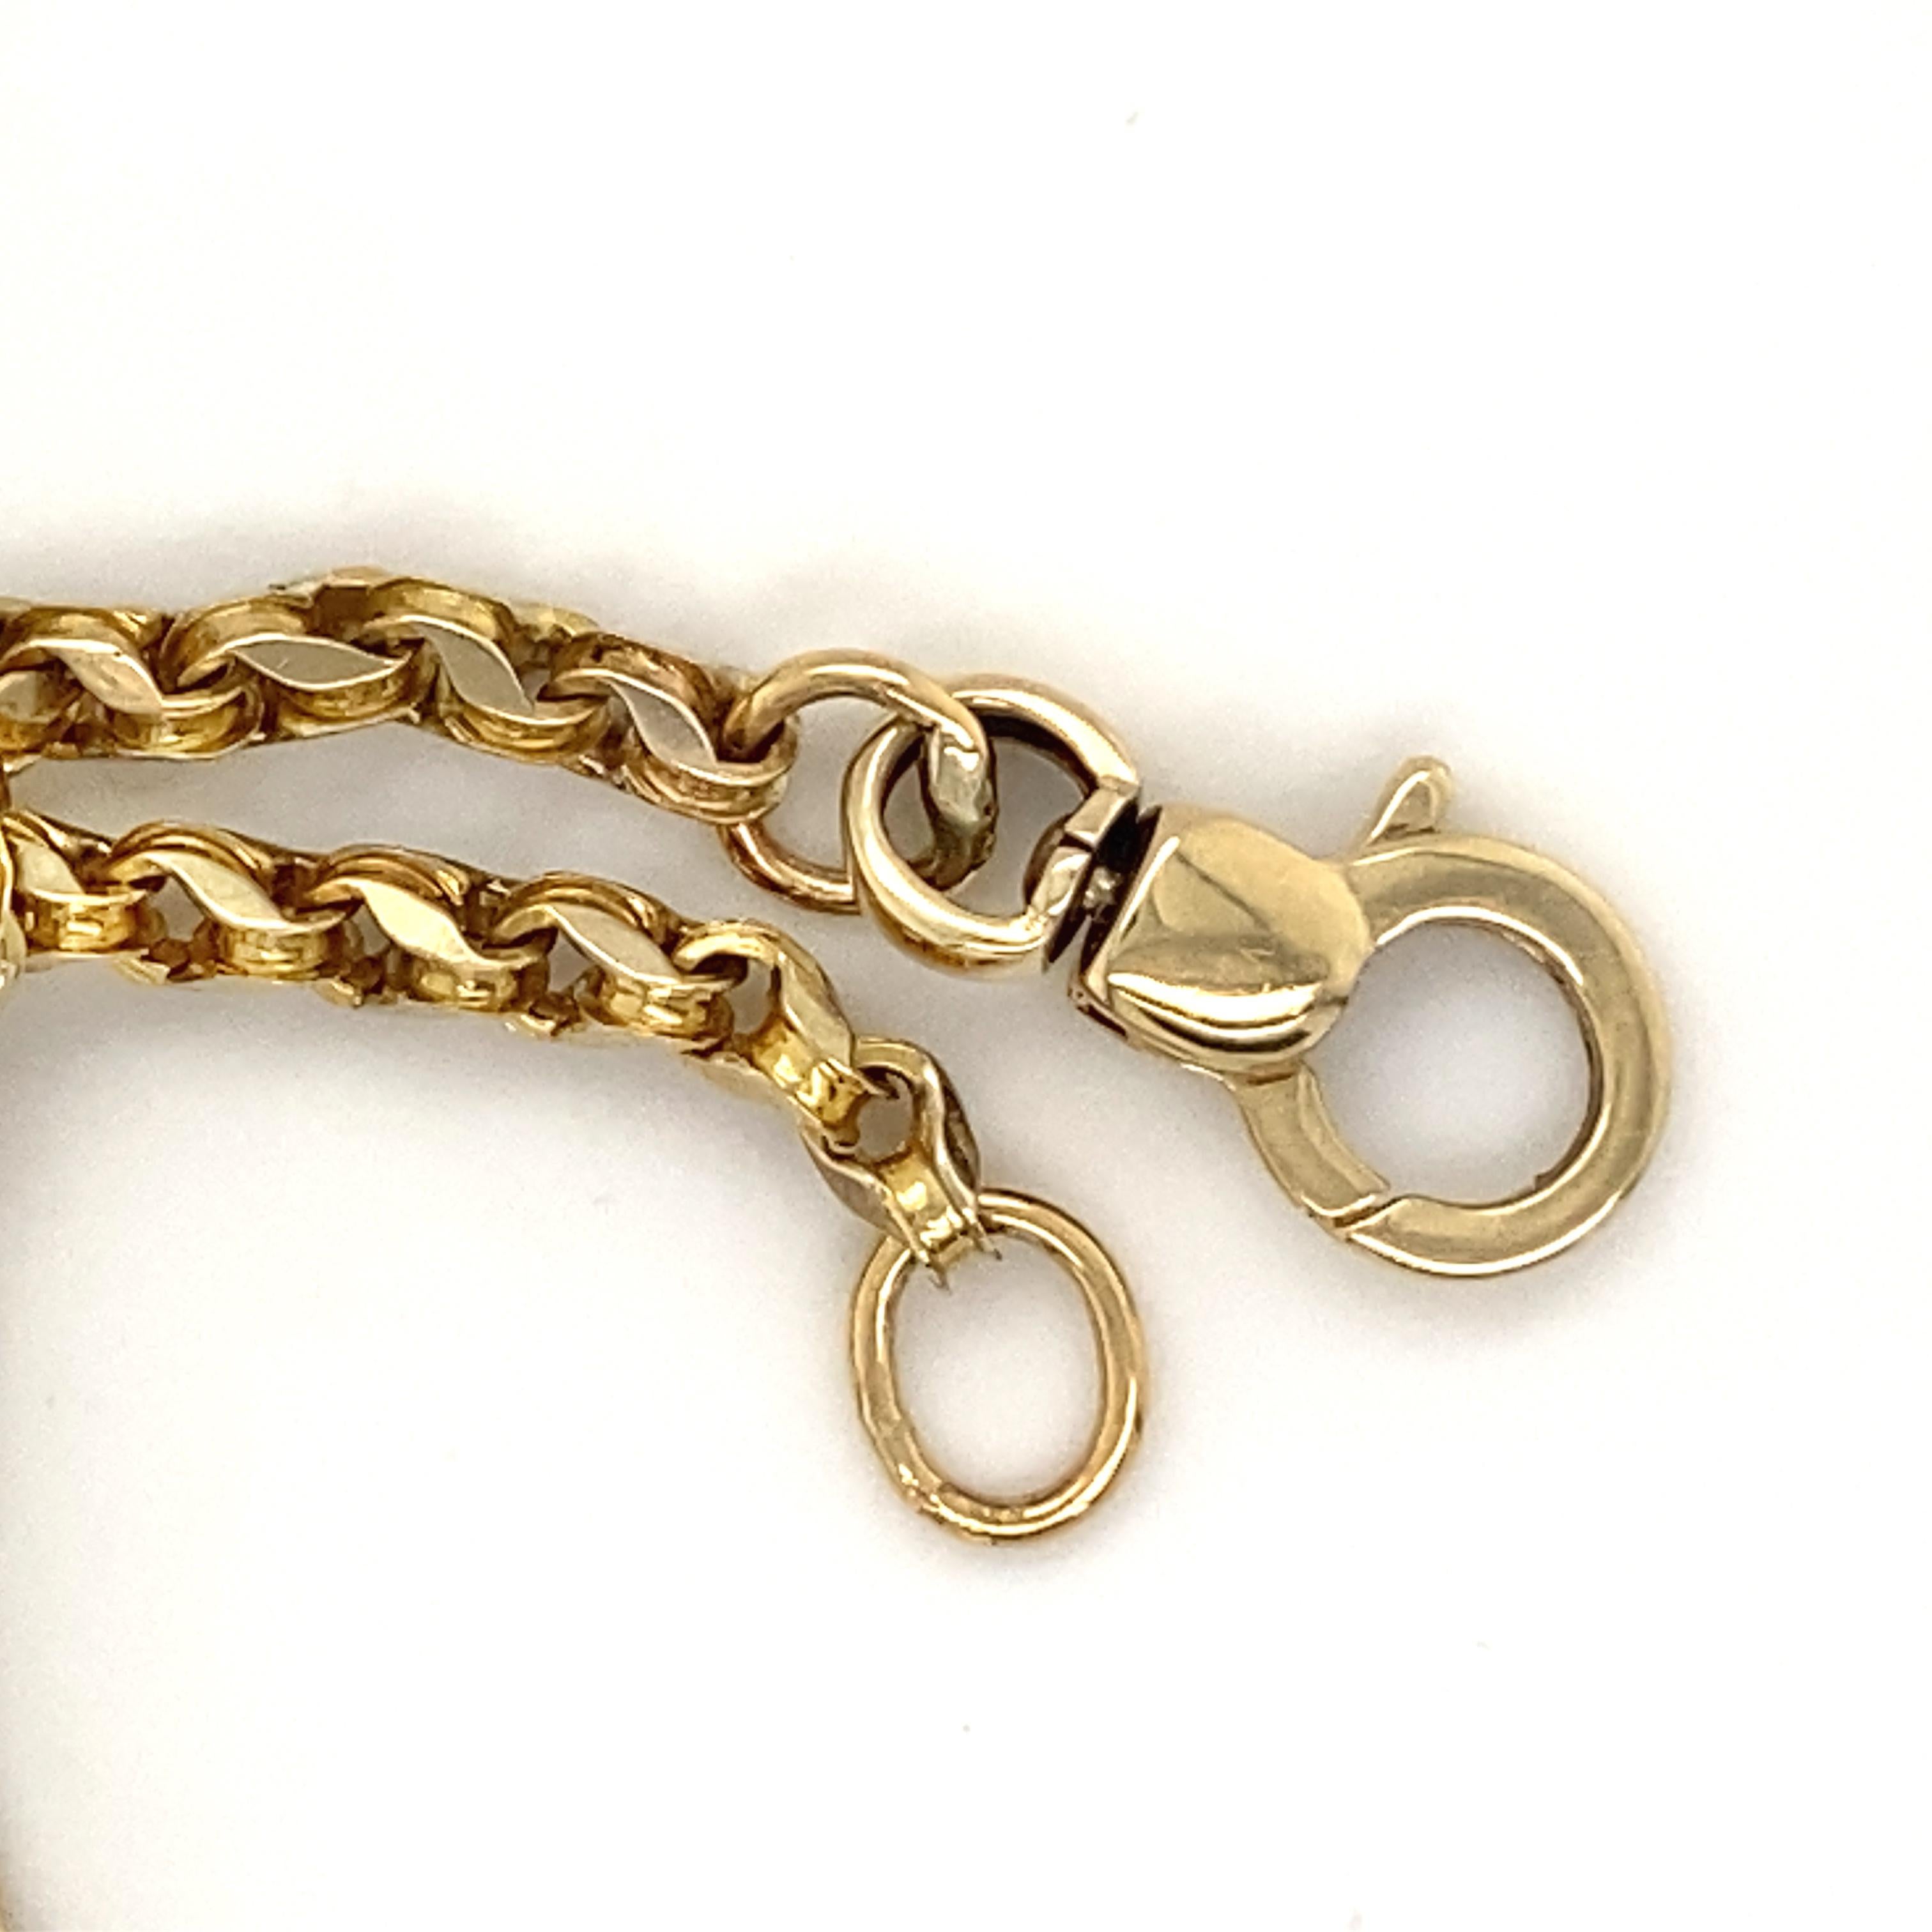 Opera-Length Fancy Figure 8 Chain with Swivel Bolt Ring Closure in Yellow Gold 4